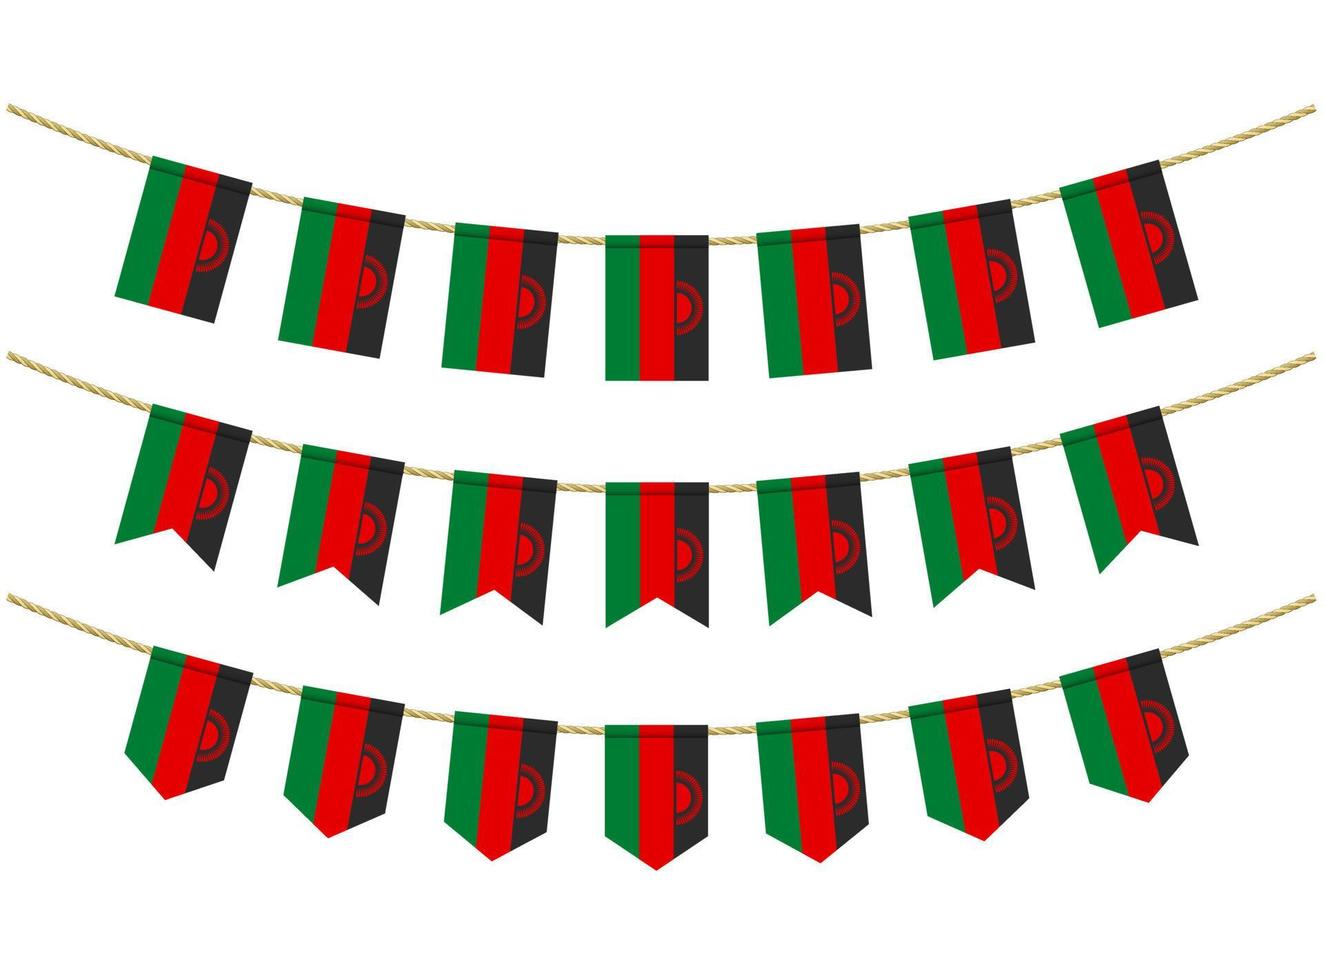 Malawi flag on the ropes on white background. Set of Patriotic bunting flags. Bunting decoration of Malawi flag vector